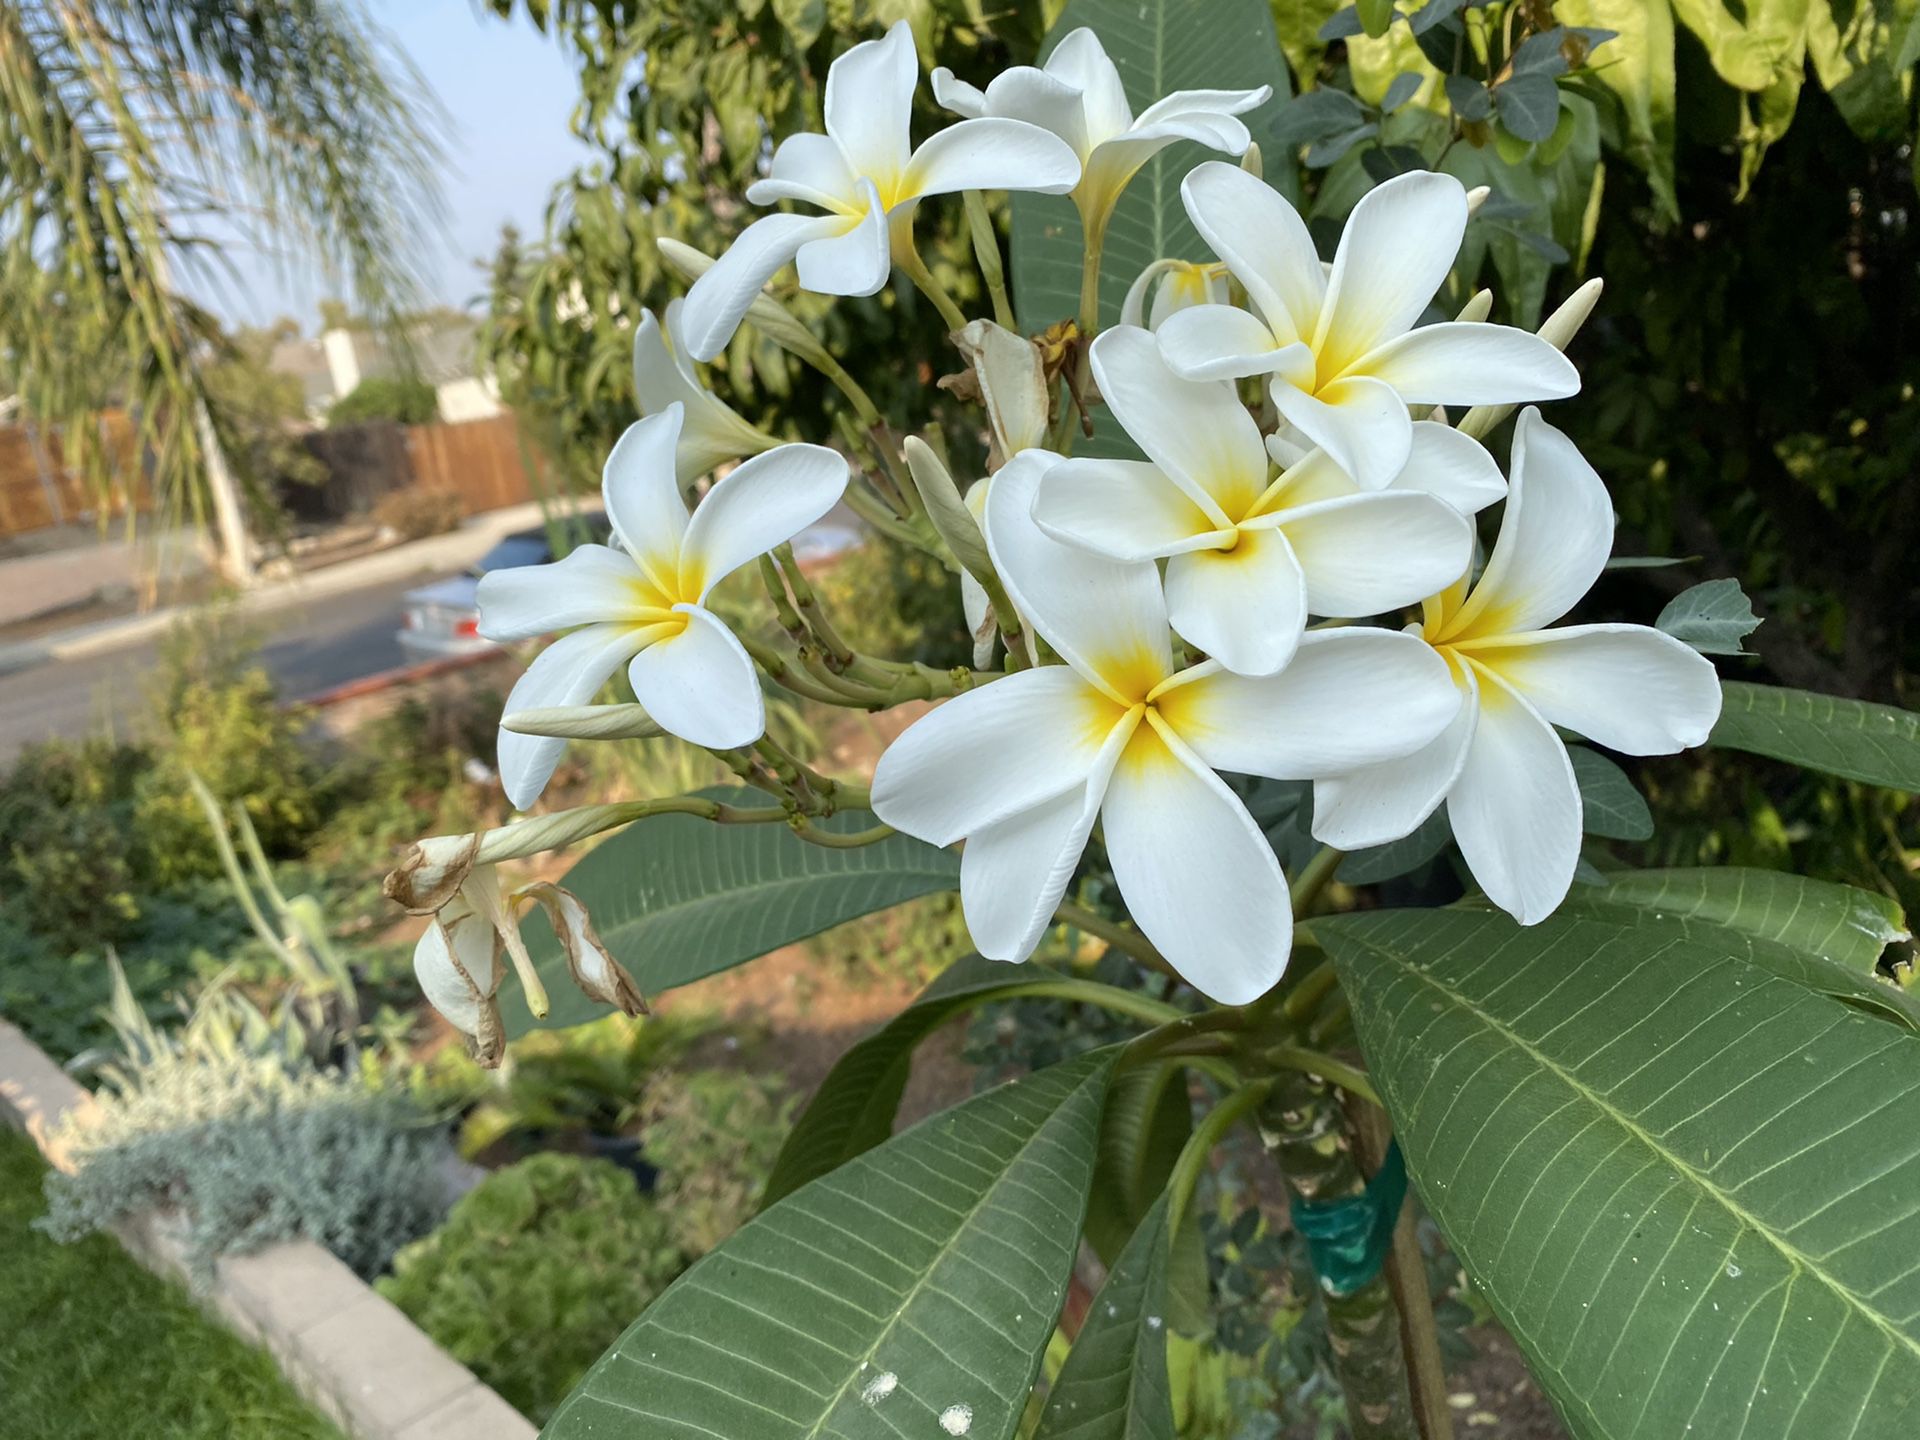 Plumeria plant 🌱, rooted, 15 gallons pot, 4 feet tall, $65 each